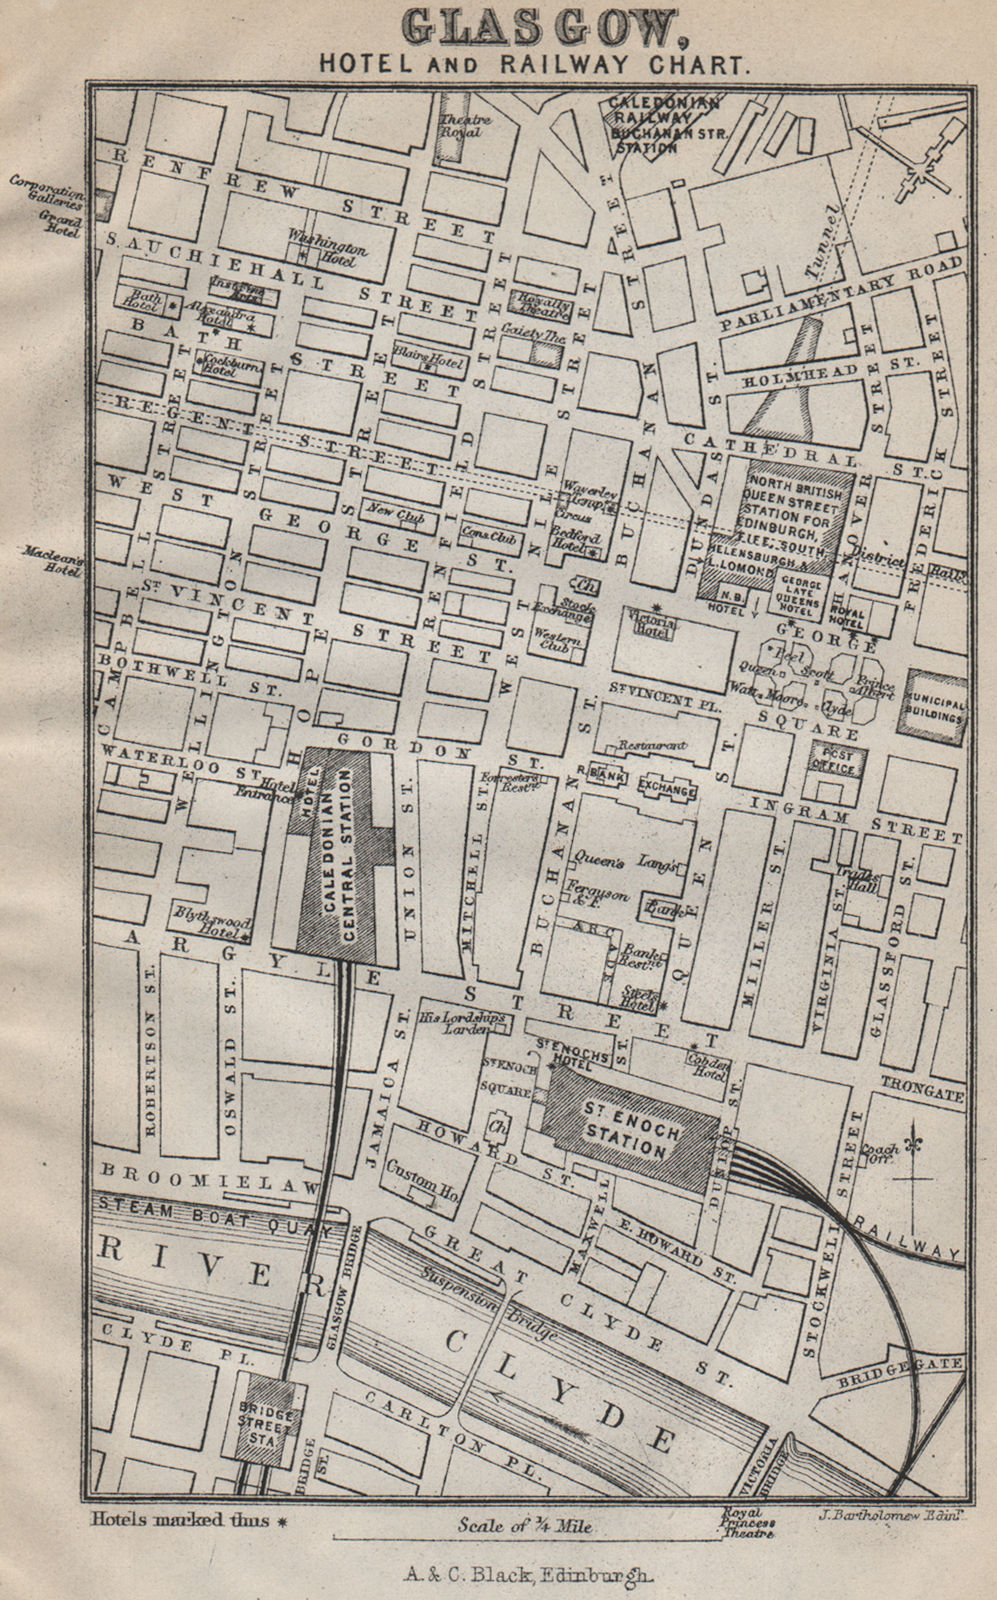 GLASGOW Hotel and Railway Chart. Caledonian central & St Enoch stations 1886 map